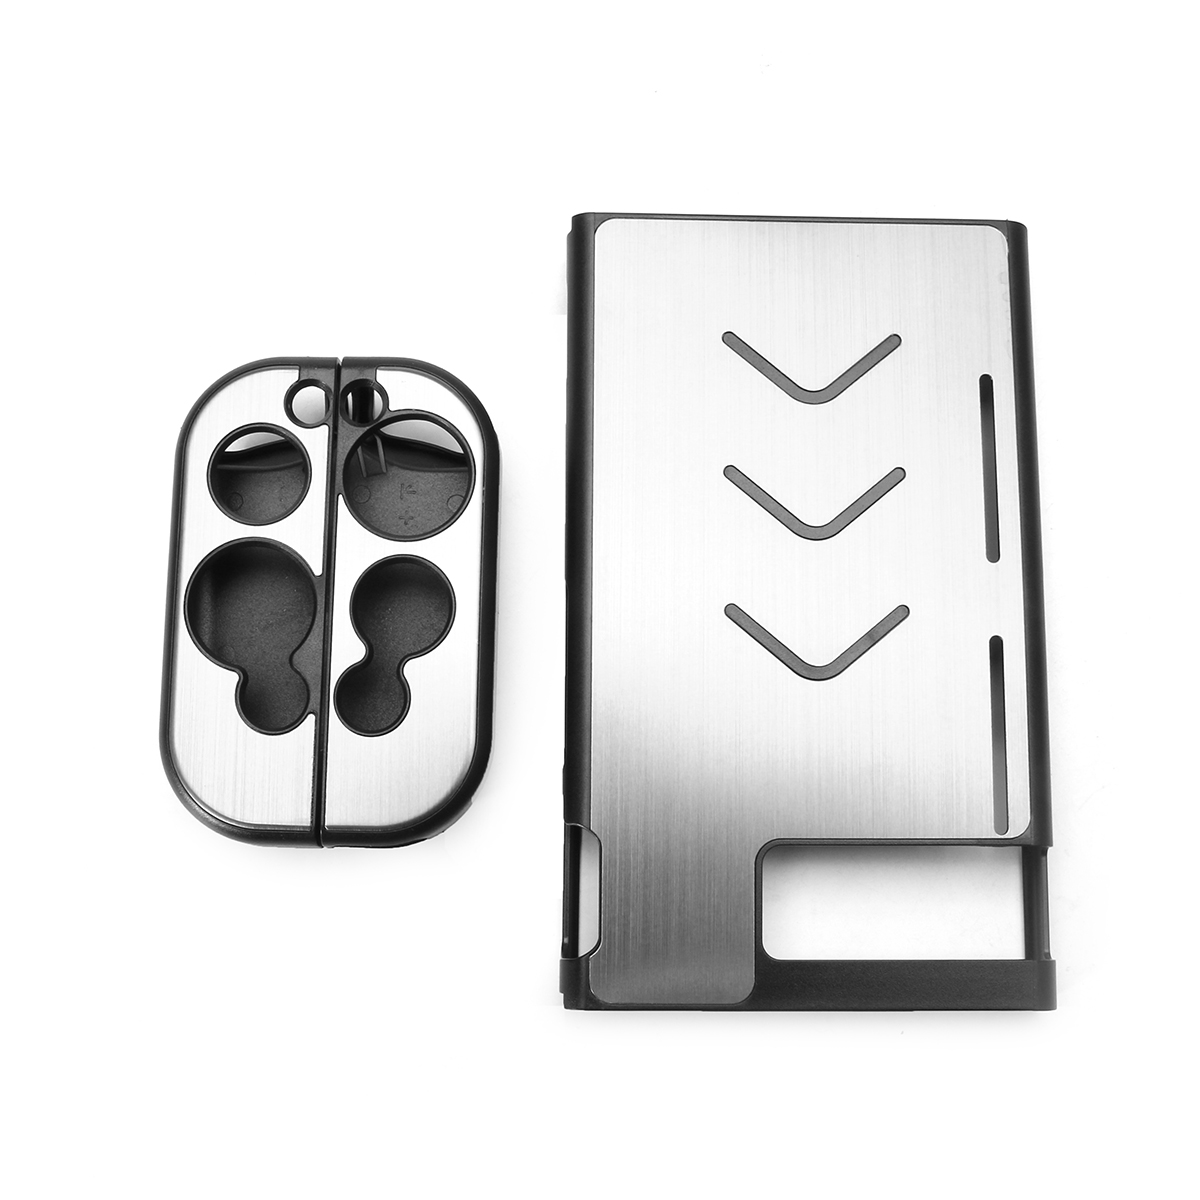 Replacement Accessories Housing Shell Case Protective For Nintendo Switch Controller Joy-con 38